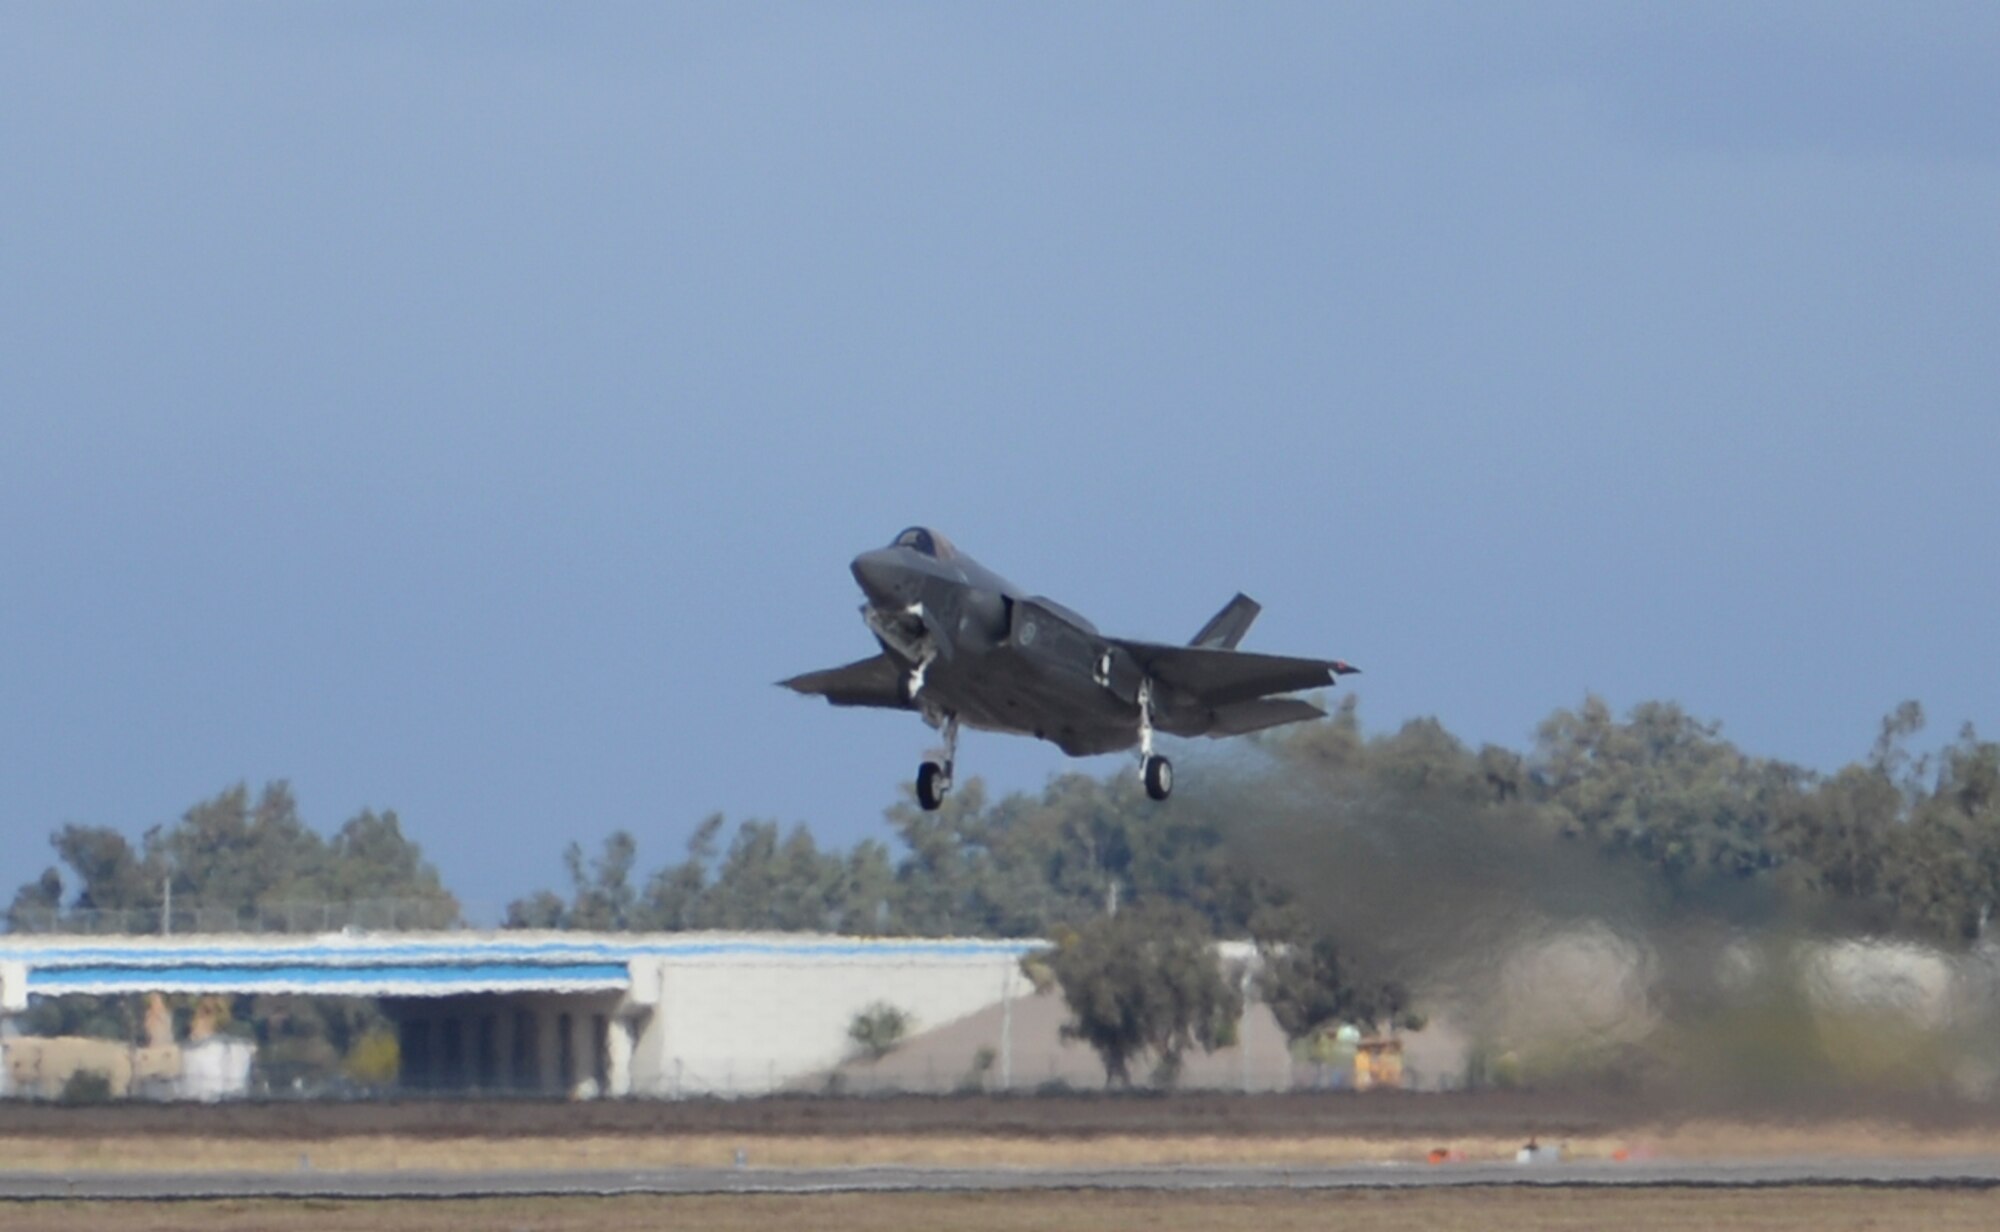 Royal Norwegian Air Force Maj. Morten Hanche, a 62nd Fighter Squadron F-35 Lightning II student pilot, makes a historic takeoff Dec. 14, 2015, at Luke Air Force Base, Ariz. This was the first time a Norwegian F-35 was launched under the helm of a Norwegian pilot. (U.S. Air Force photo/Airman 1st Class Ridge Shan)